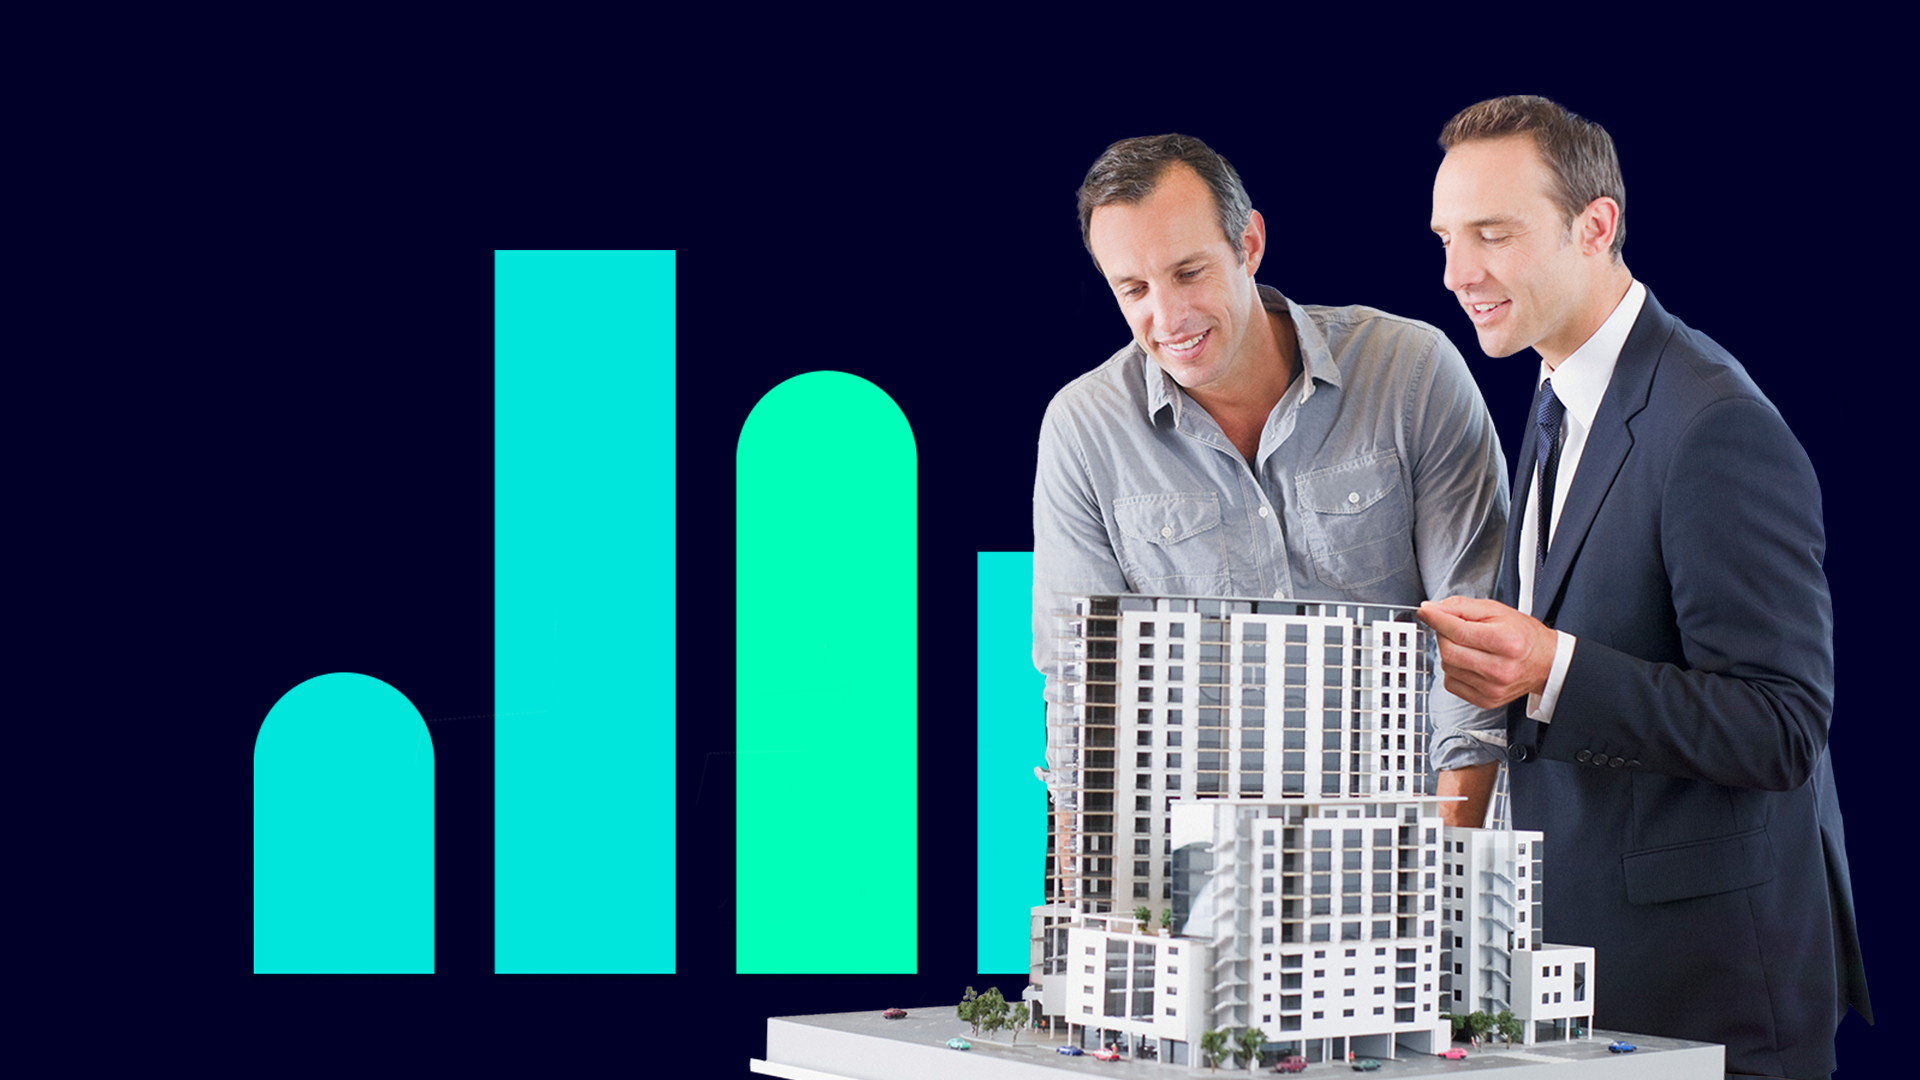 Image of two business men looking at a city model with bar chart icon in background